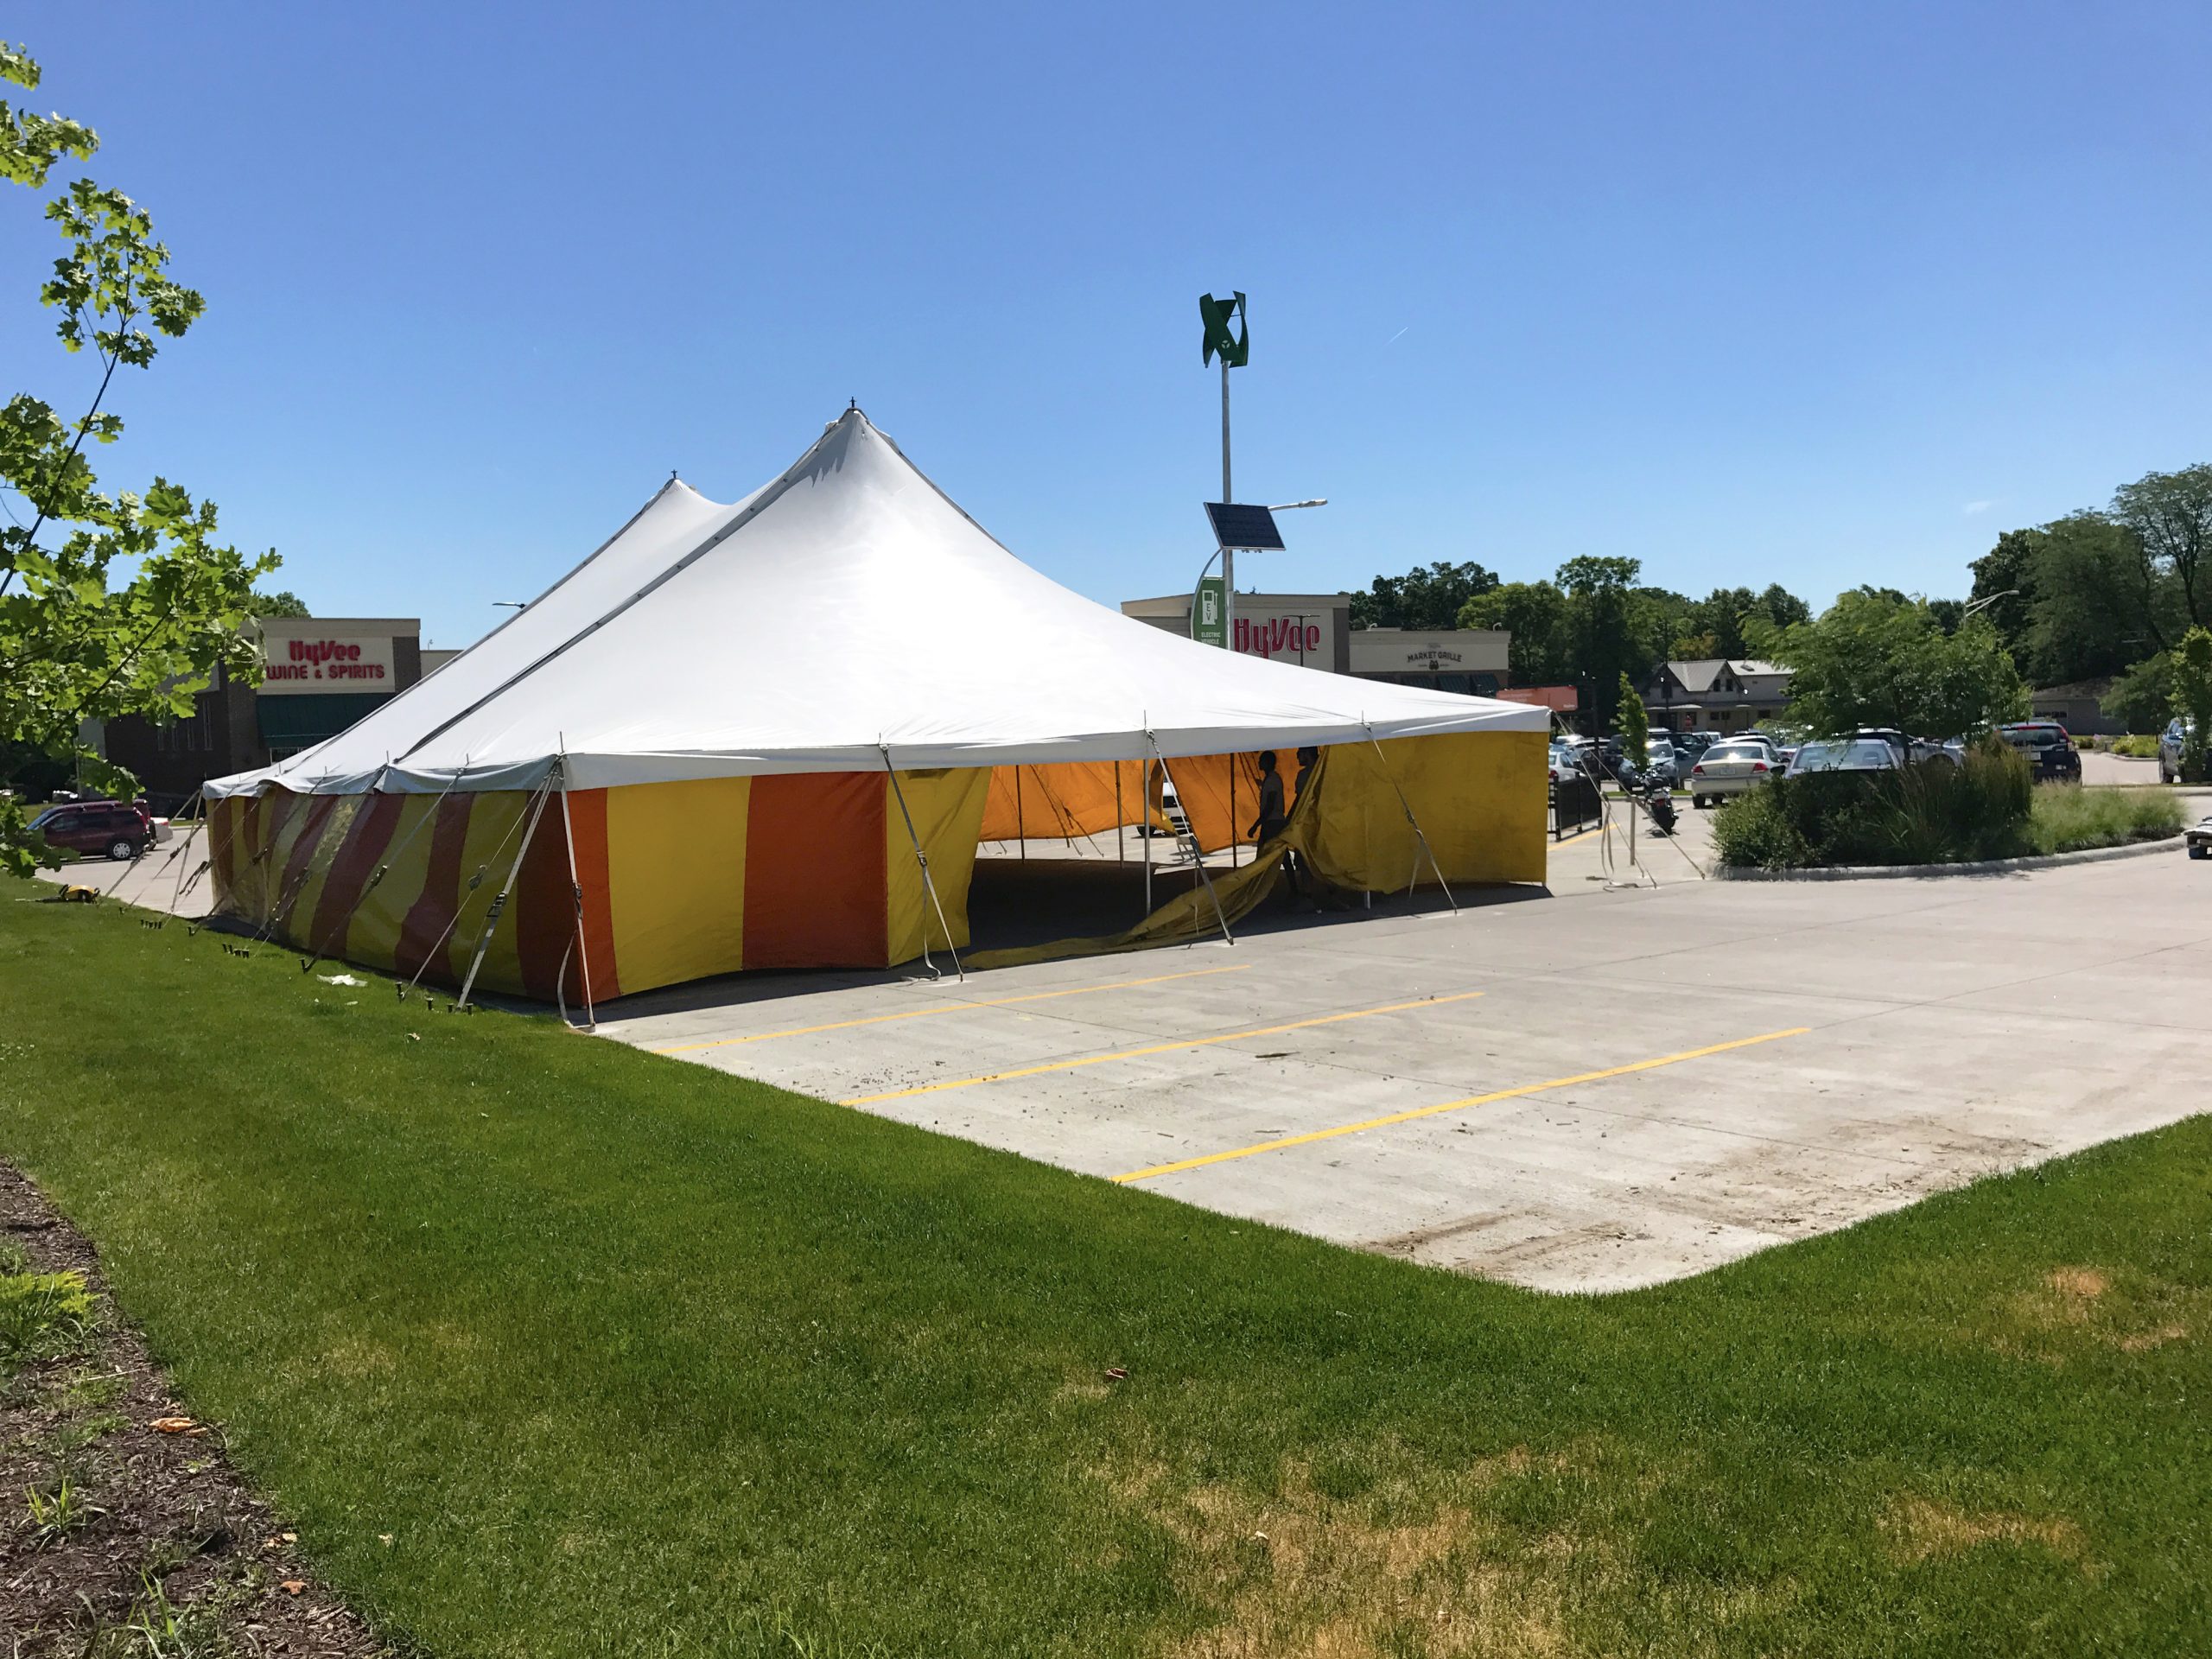 View of the parking lot at HyVee on Dodge St. in Iowa City with 40' x 60' rope and pole tent for Bellino Fireworks